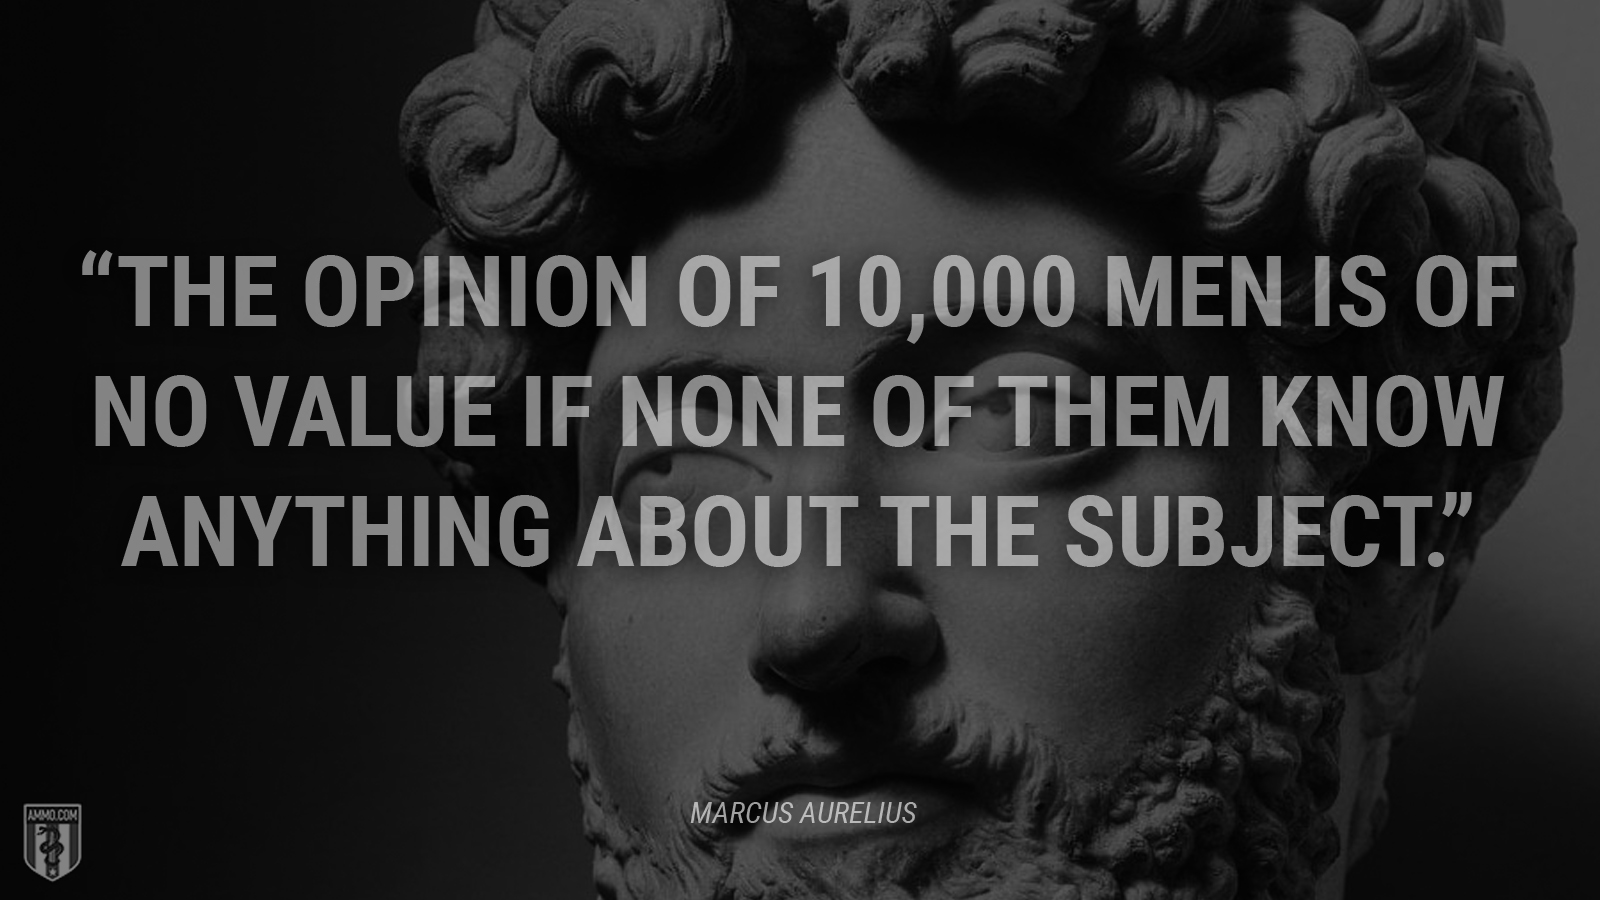 “The opinion of 10,000 men is of no value if none of them know anything about the subject.” - Marcus Aurelius